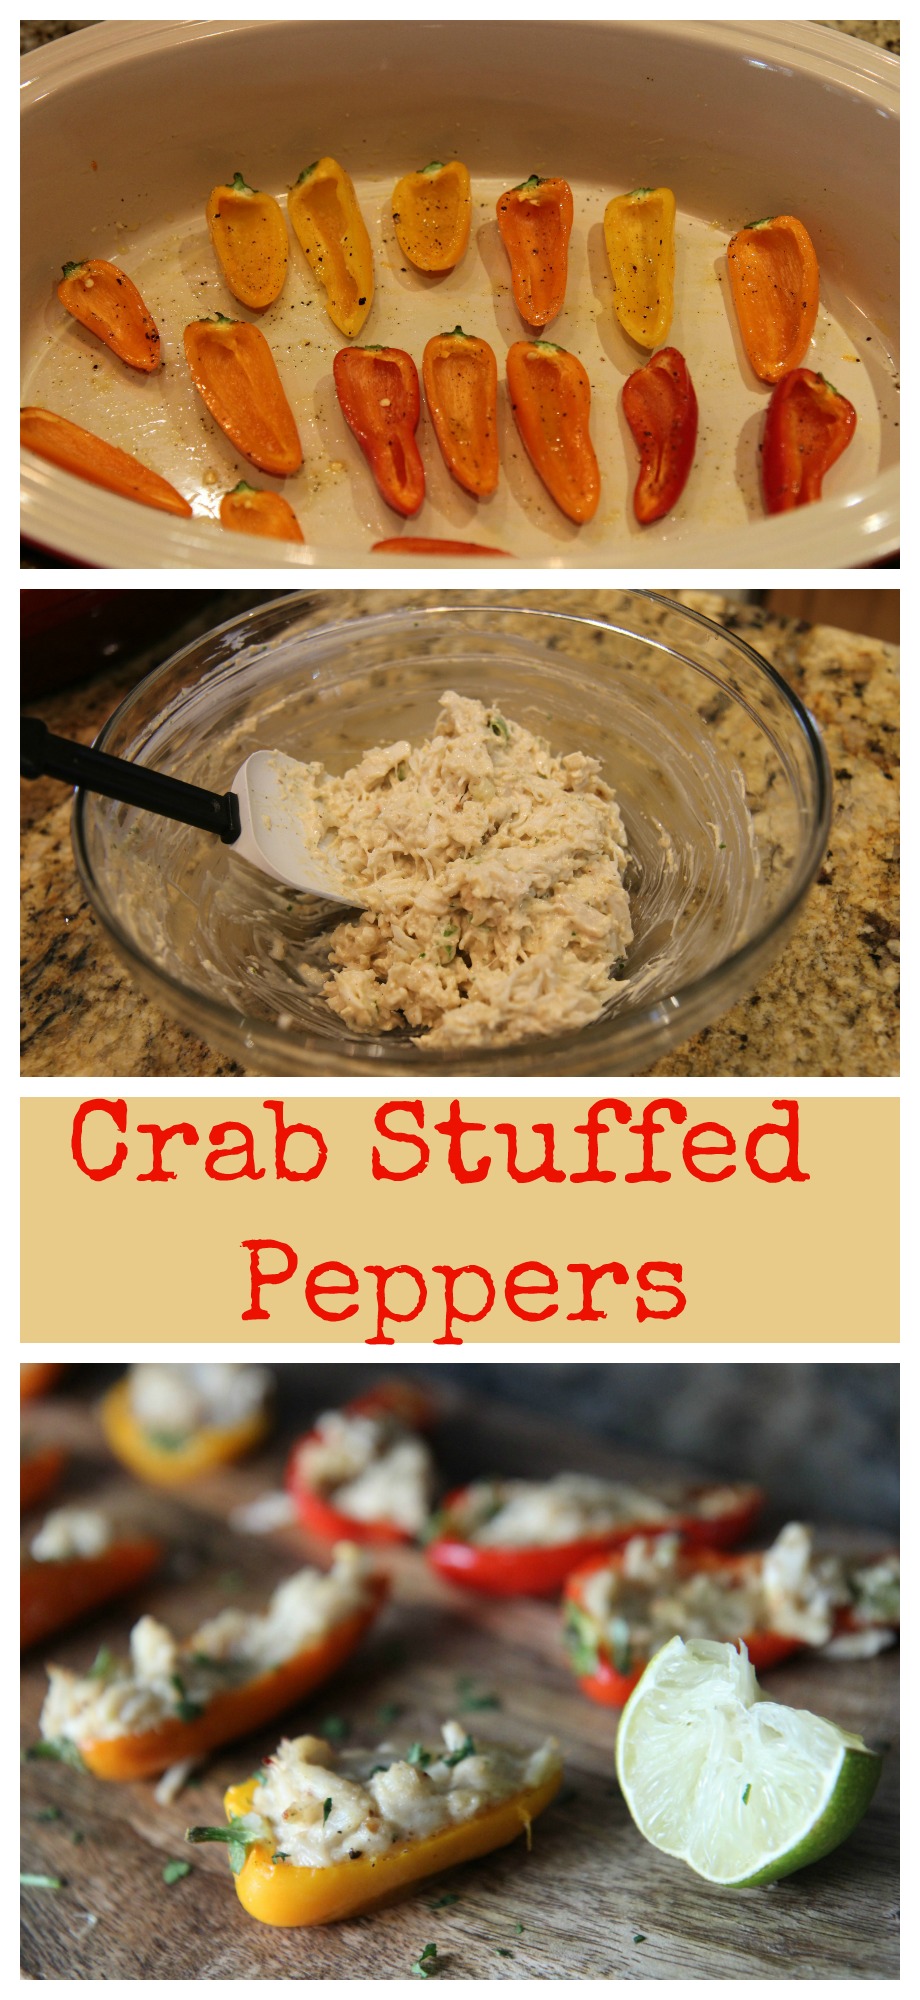 Learn how to make these Crab Stuffed Peppers at CookedbyJulie.com